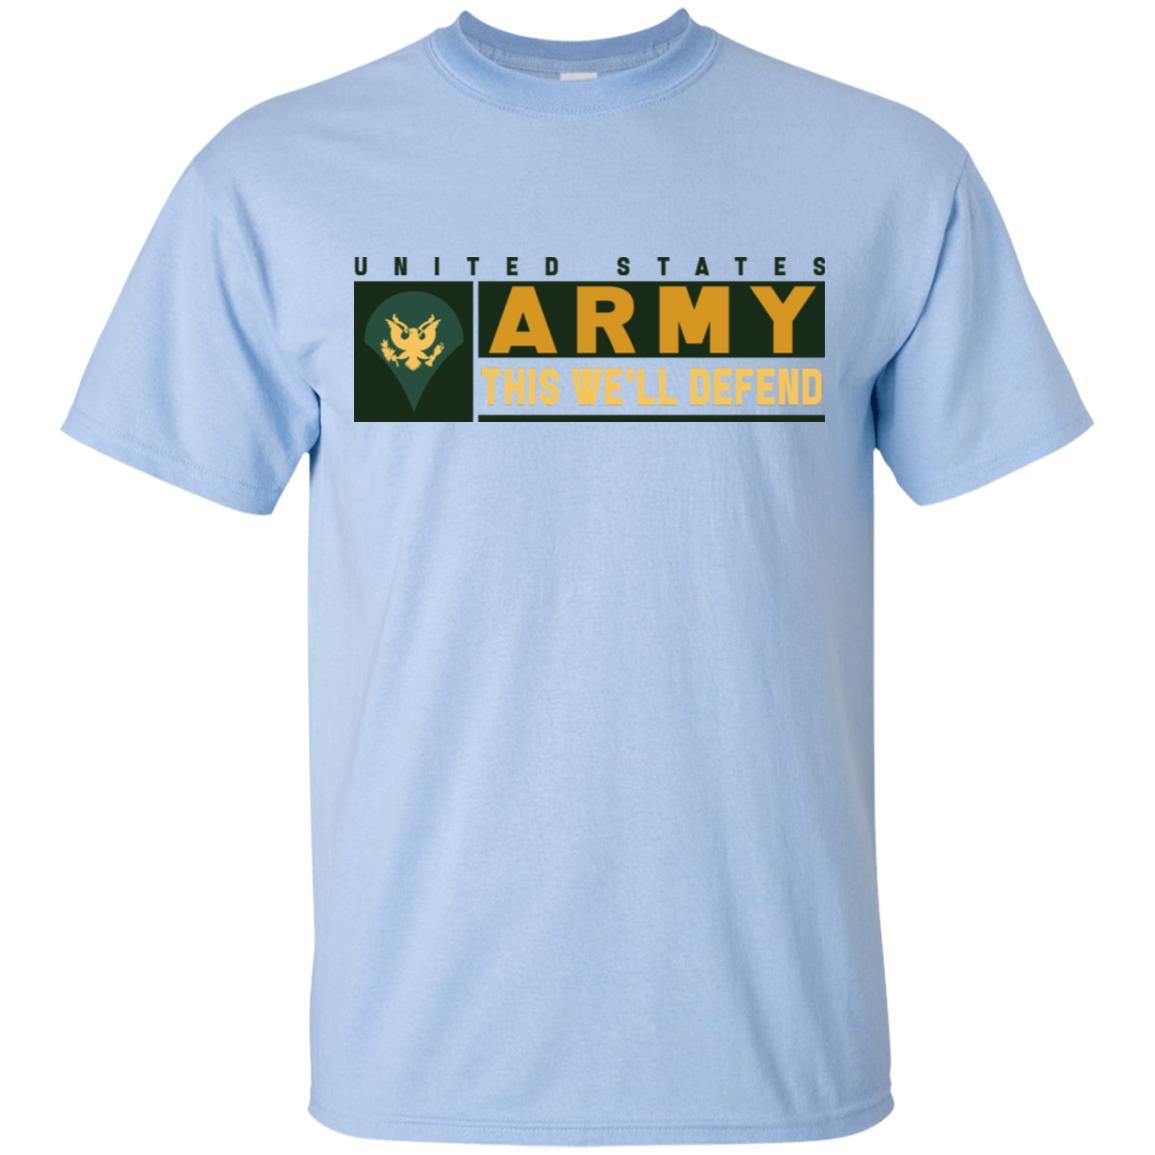 US Army E-4 SPC This We Will Defend T-Shirt On Front For Men-TShirt-Army-Veterans Nation